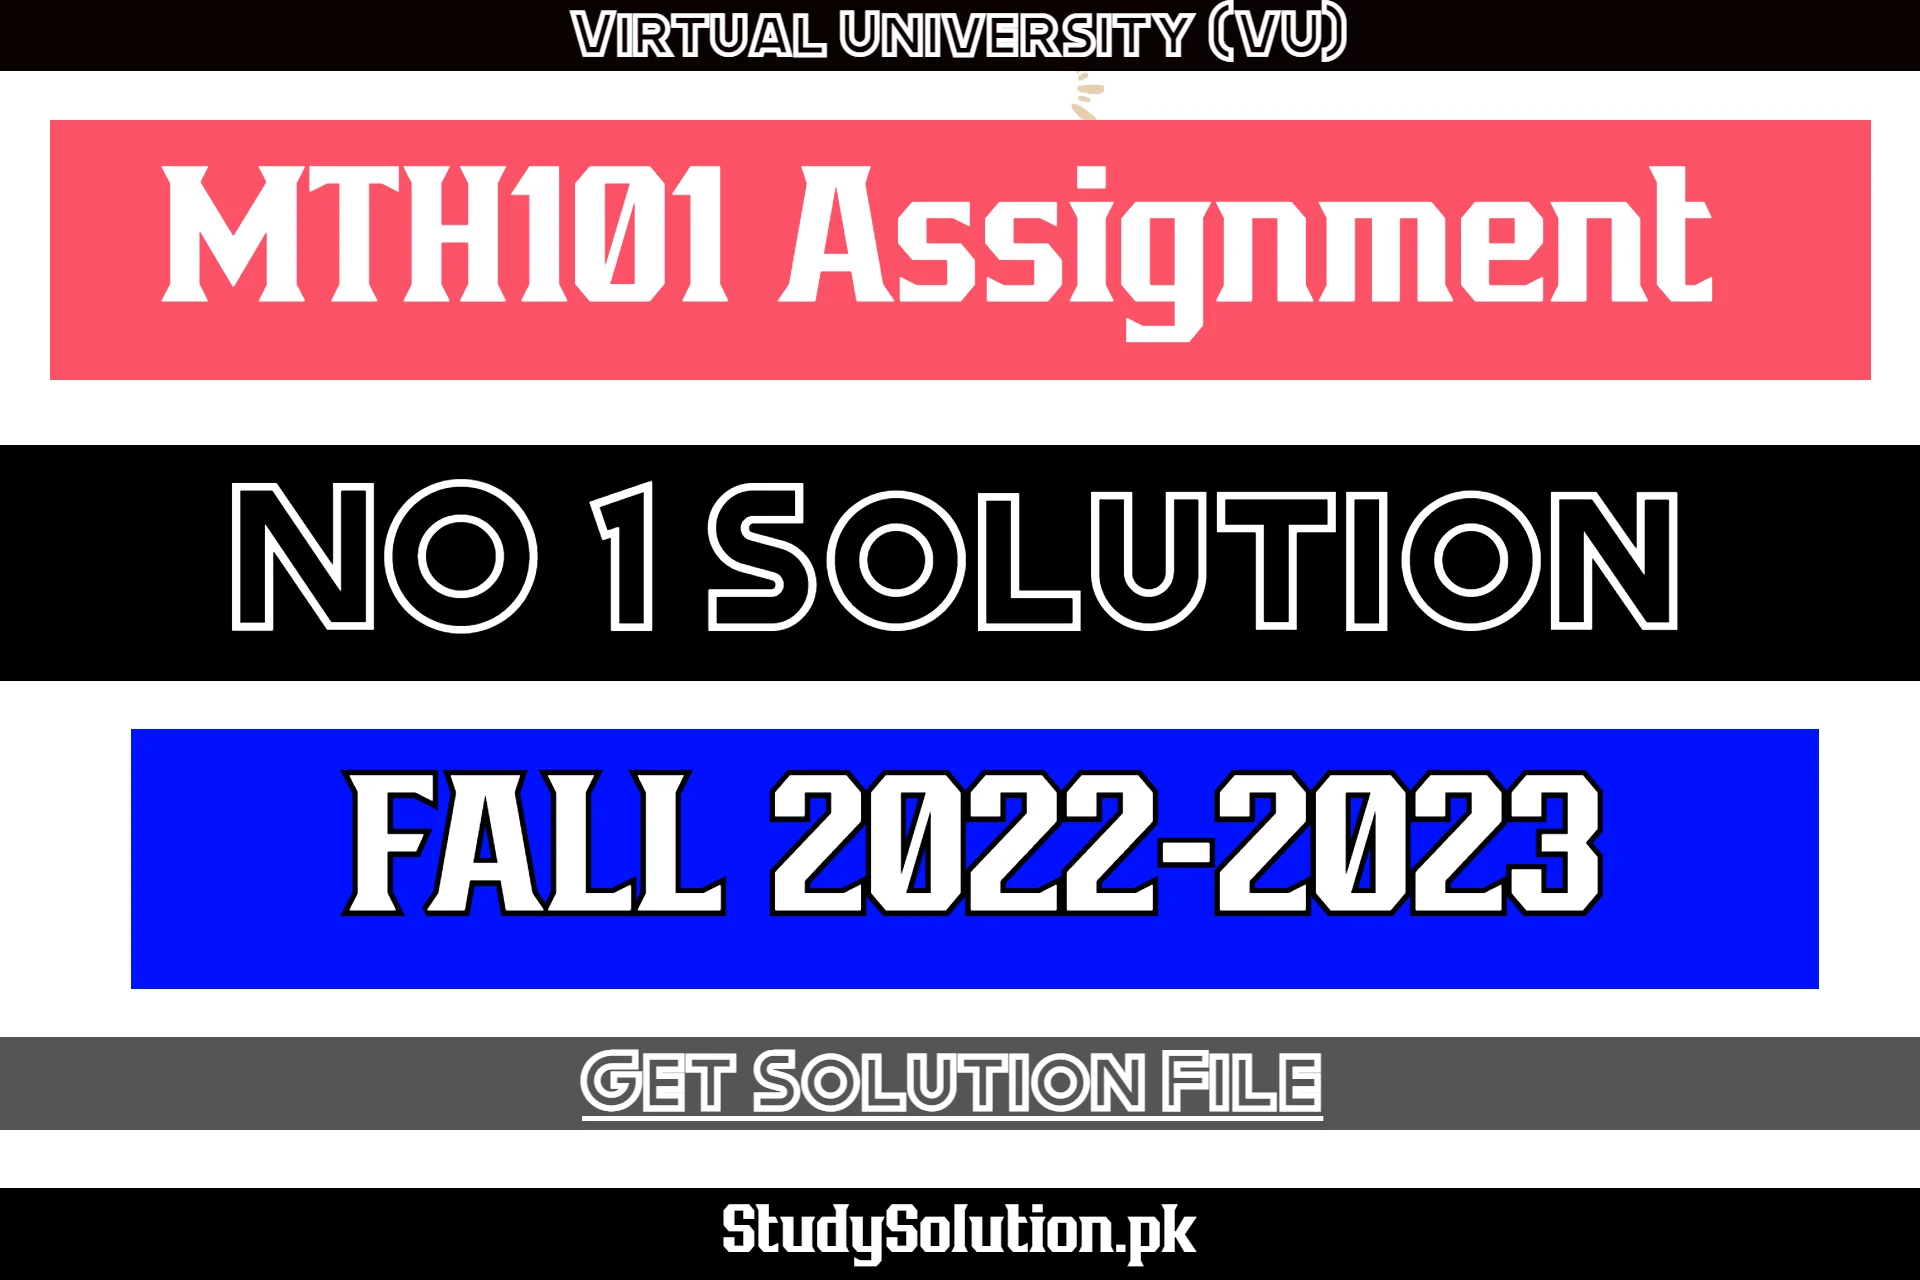 MTH101 Assignment No 1 Solution Fall 2022